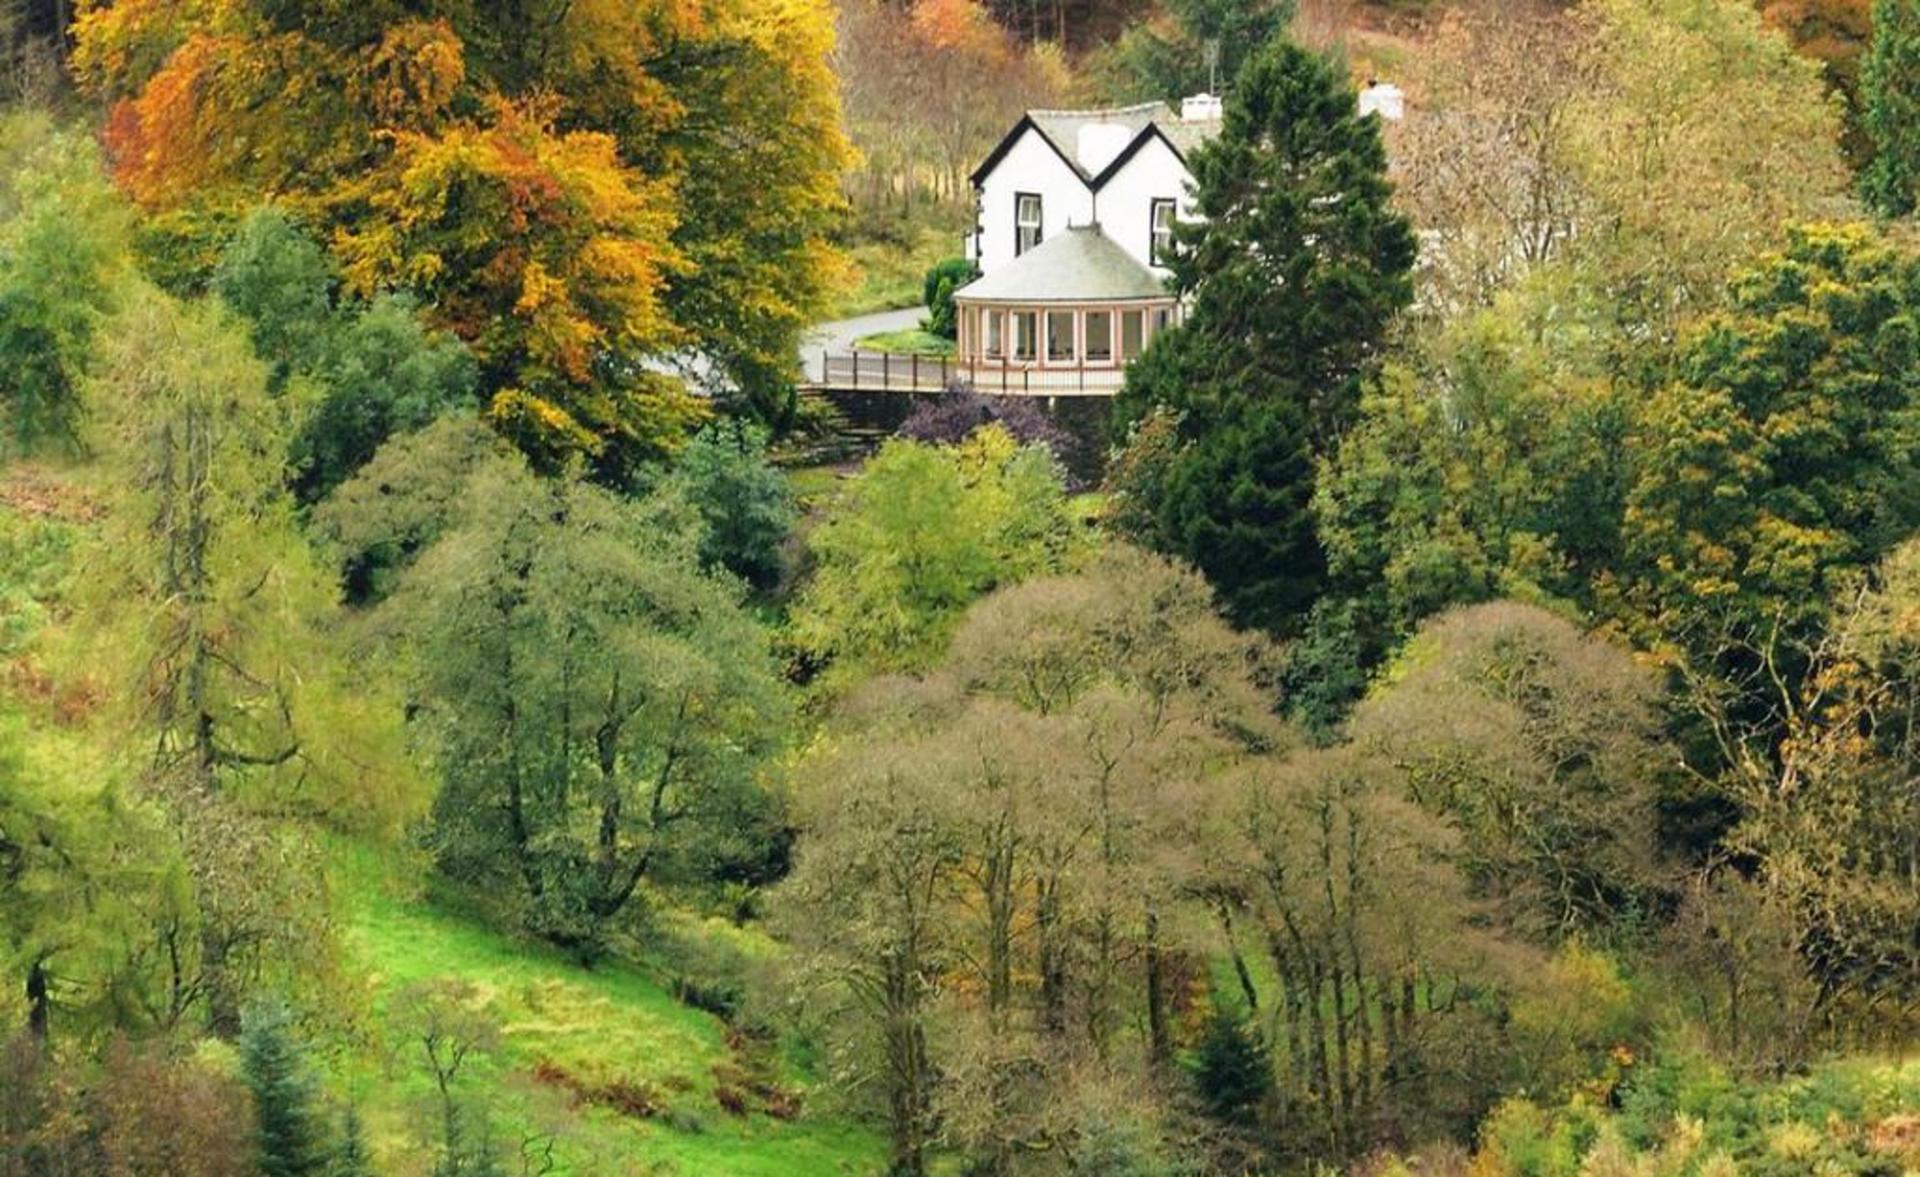 Michelin-star Lake District restaurant on the market for £1.25m